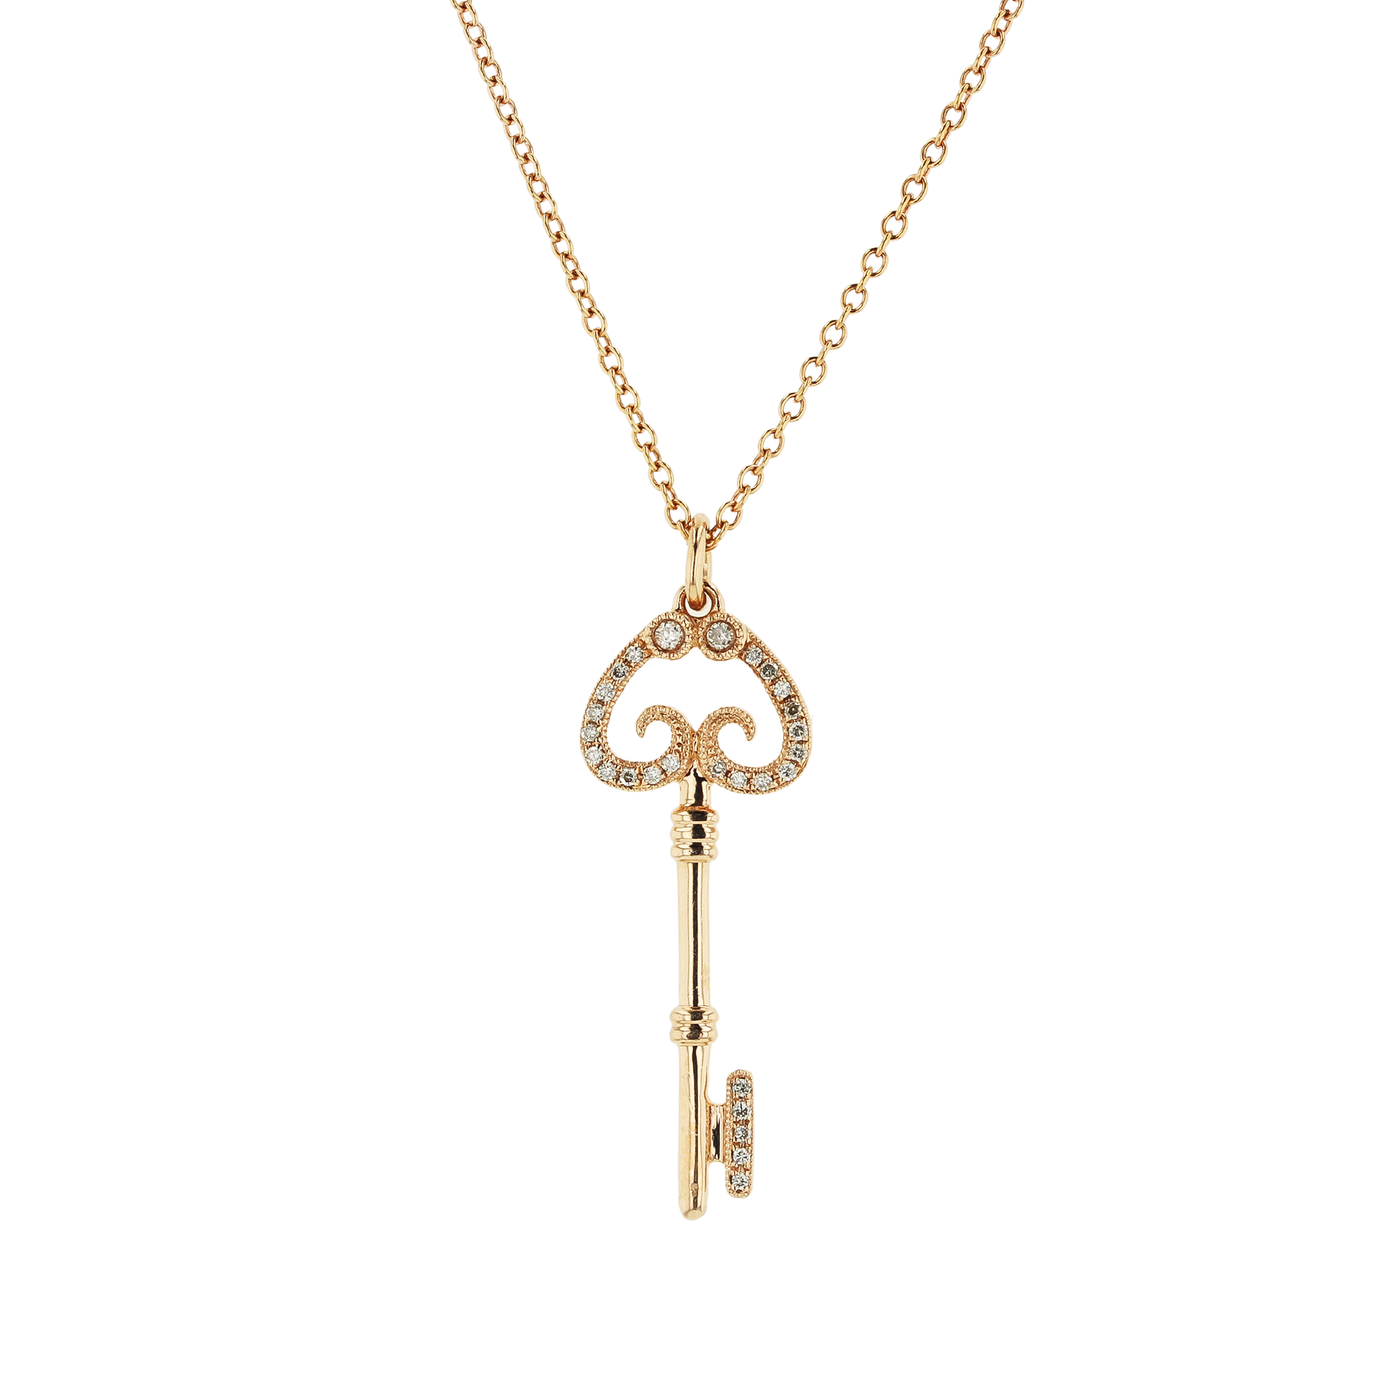 "Key to Enchantment" .10 CTTW Diamond Pendant Necklace in 14K Rose Gold